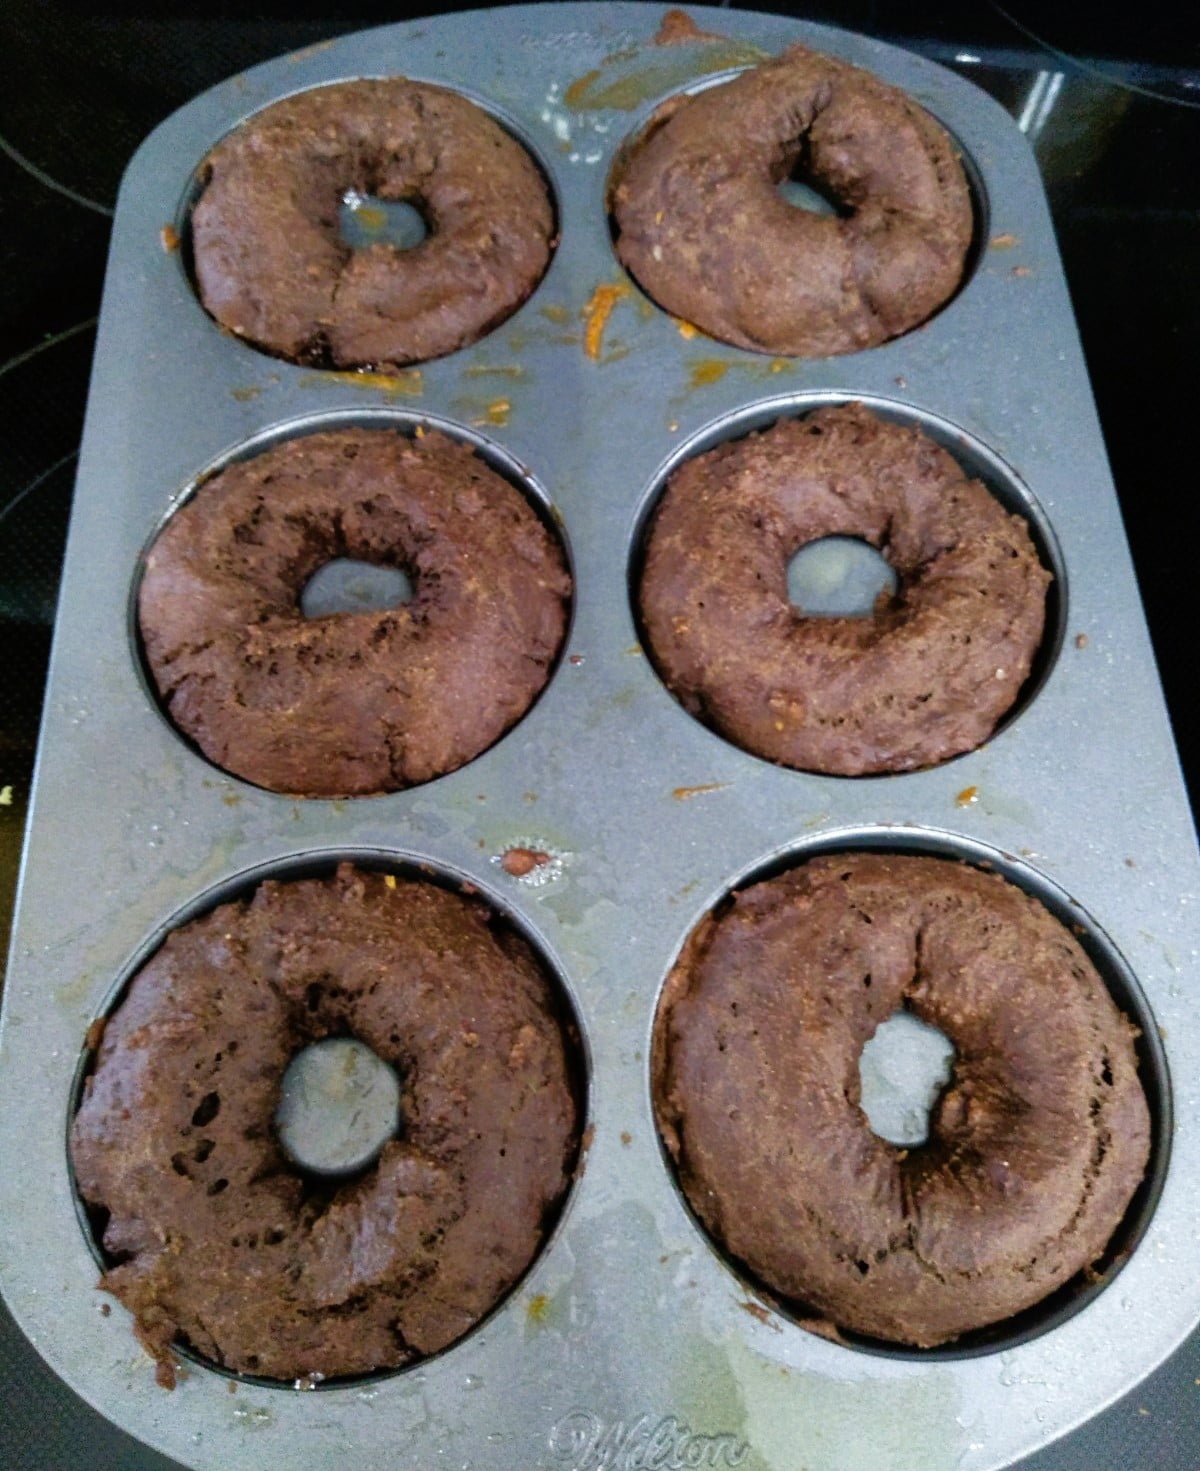 fresh out of the oven chocolate doughnuts